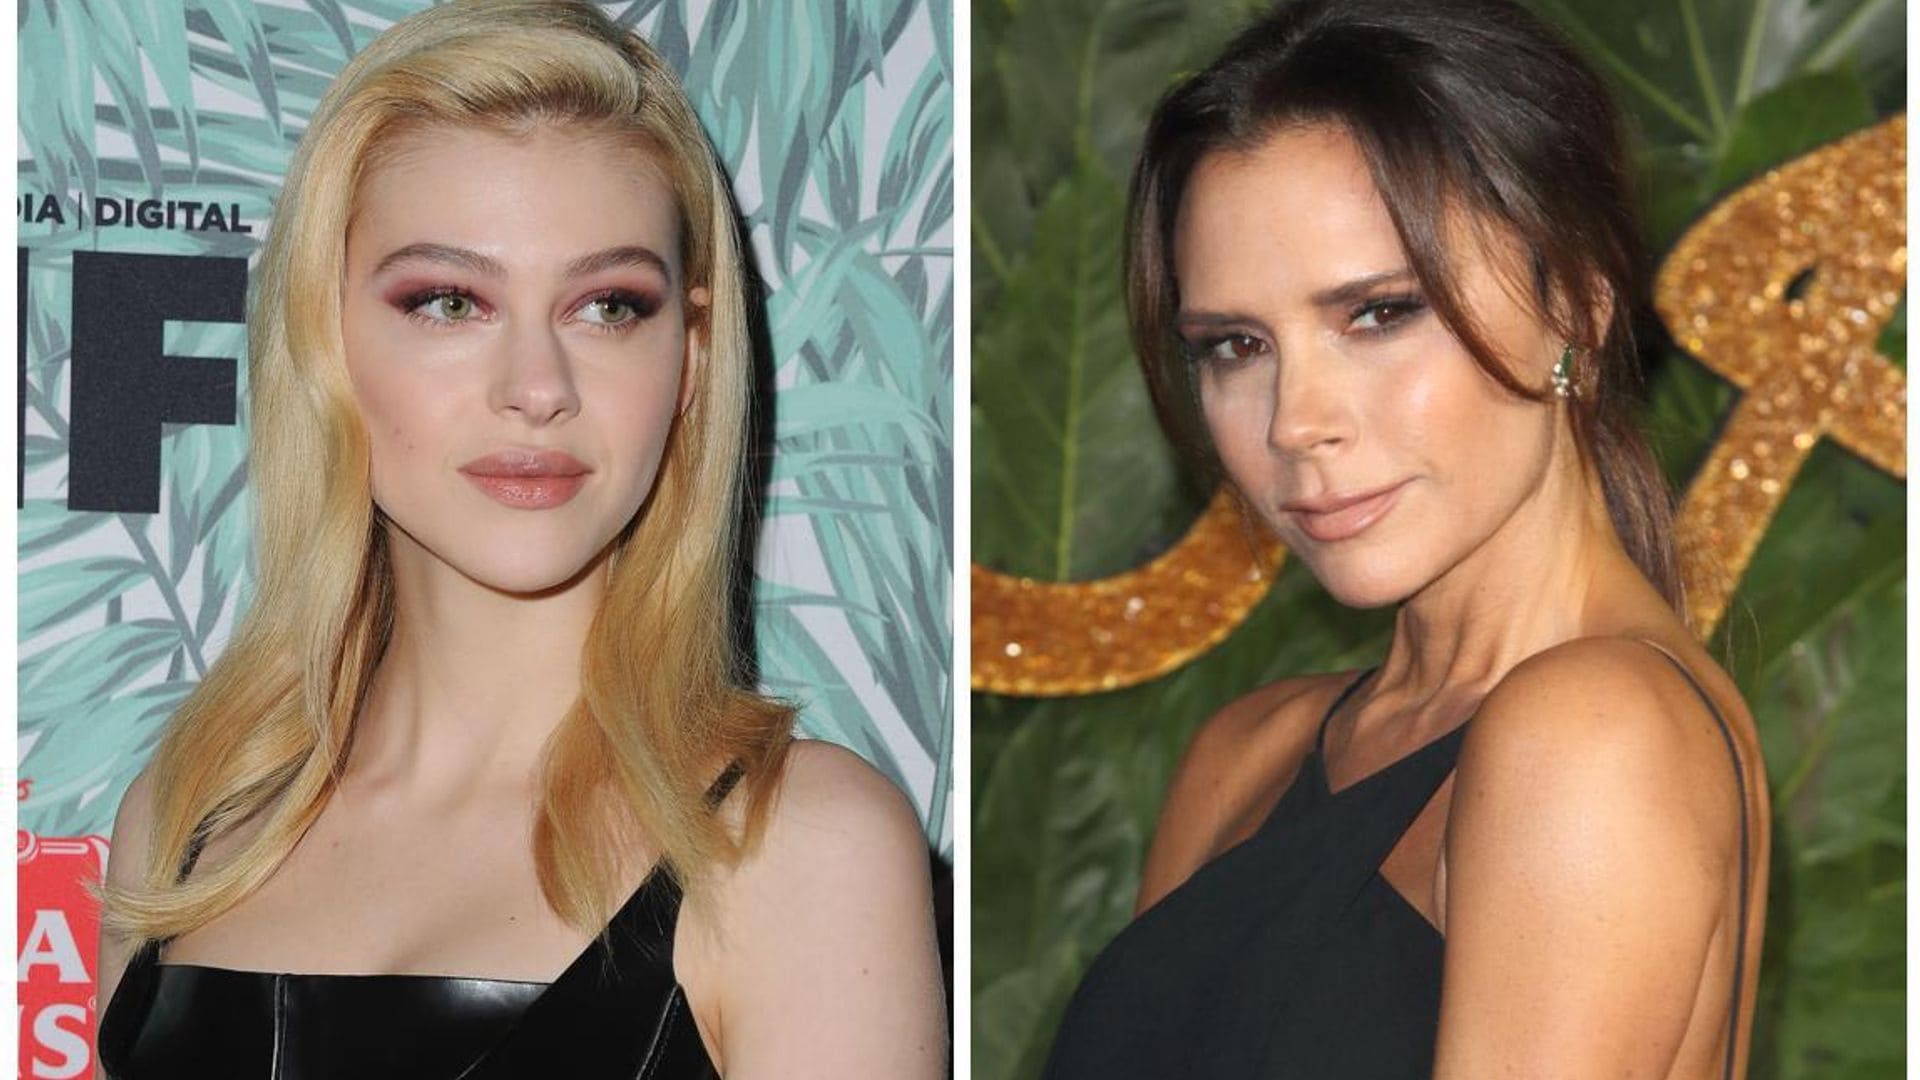 Victoria Beckham speaks out about her daughter in law Nicola Peltz